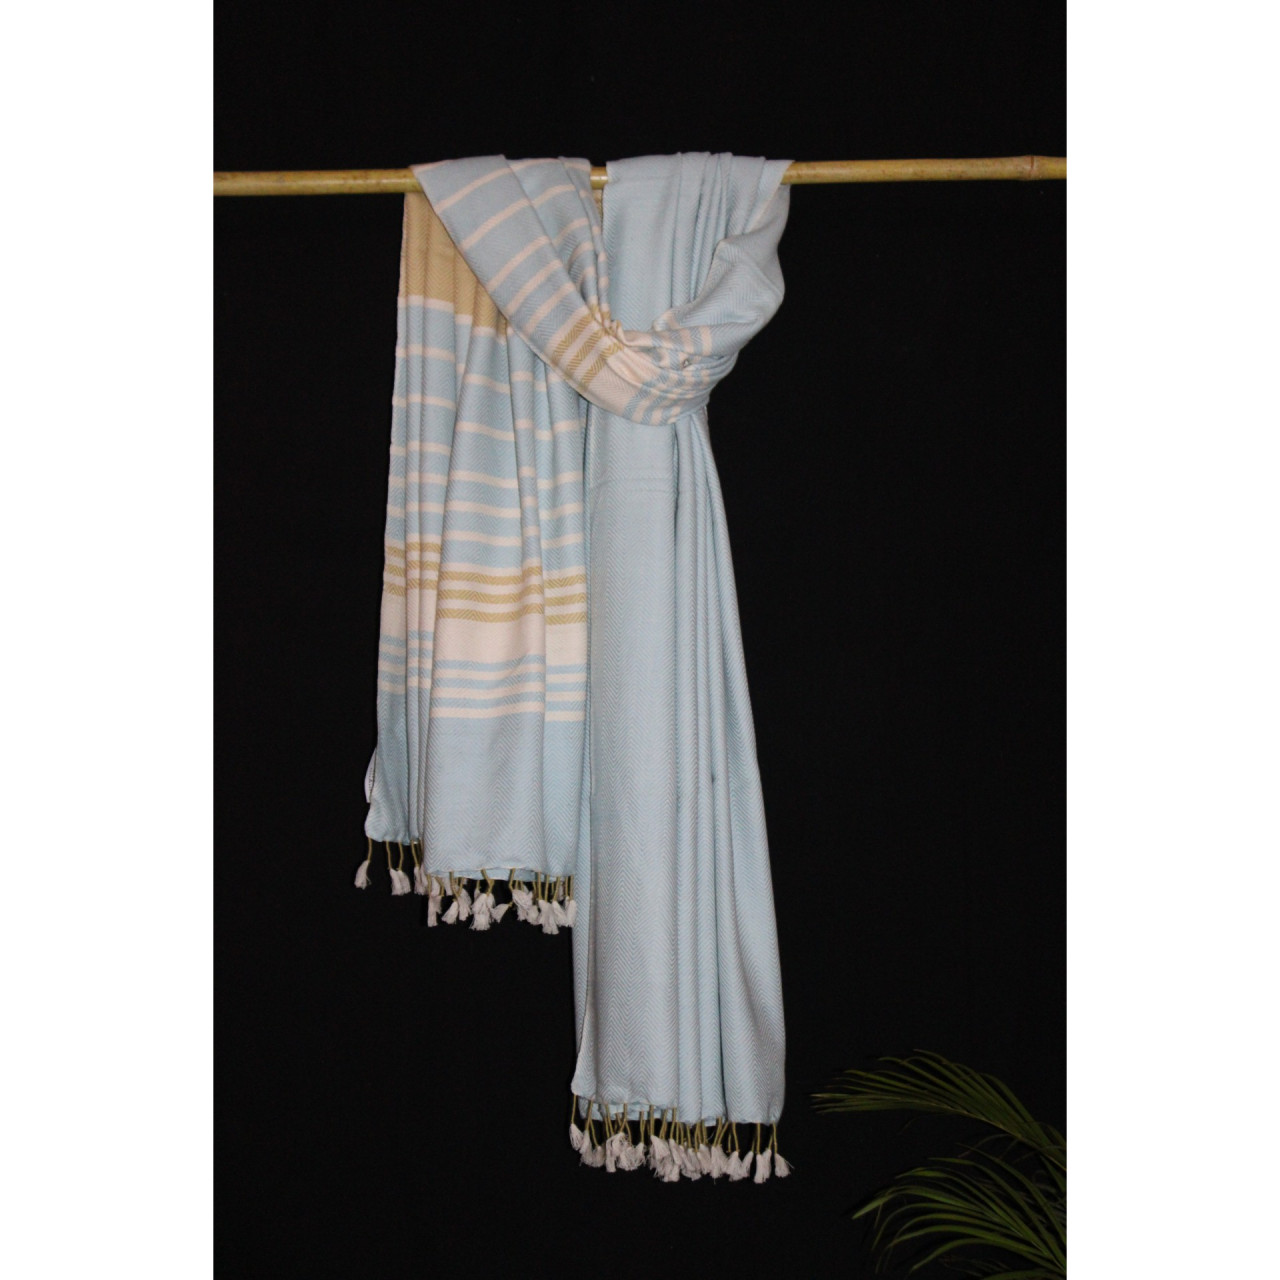 (1438) Cotton and khadi  Azo-free dyed throw from Bihar - White, sky blue, mustard, stripes, textured, piped fringes